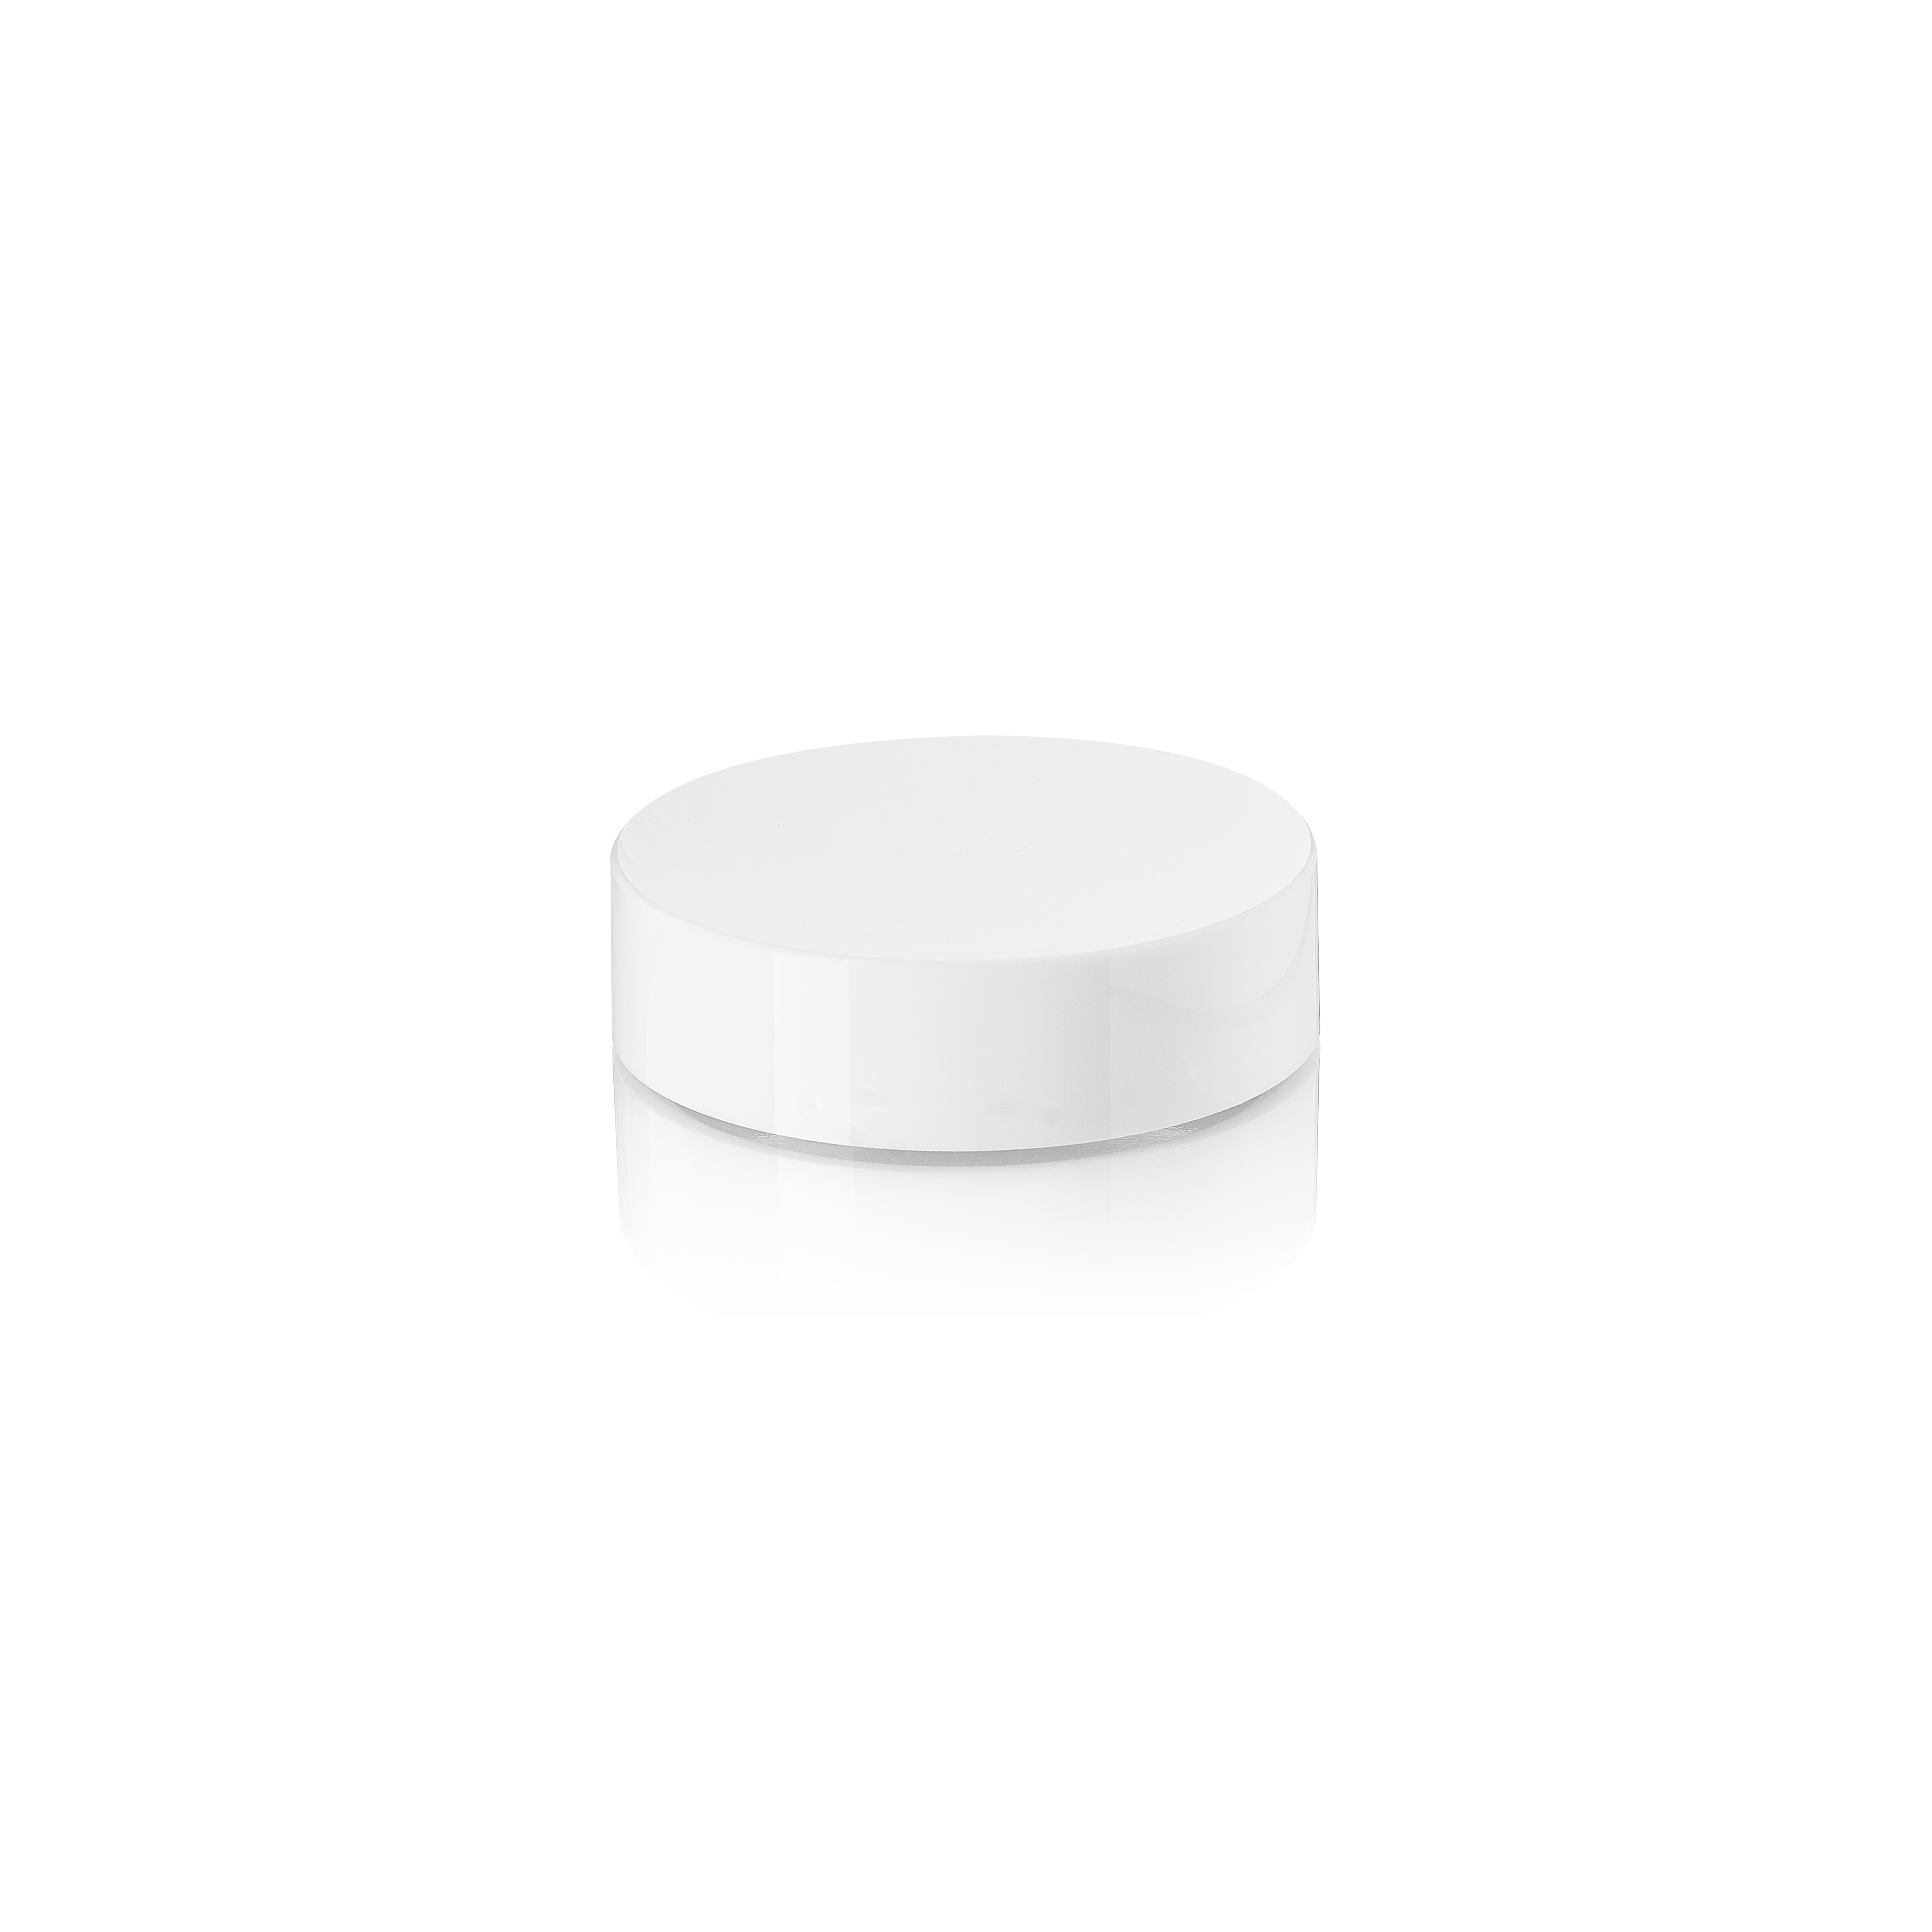 Lid double wall 64 special, PP, white, glossy finish, white inlay (Camellia 120)